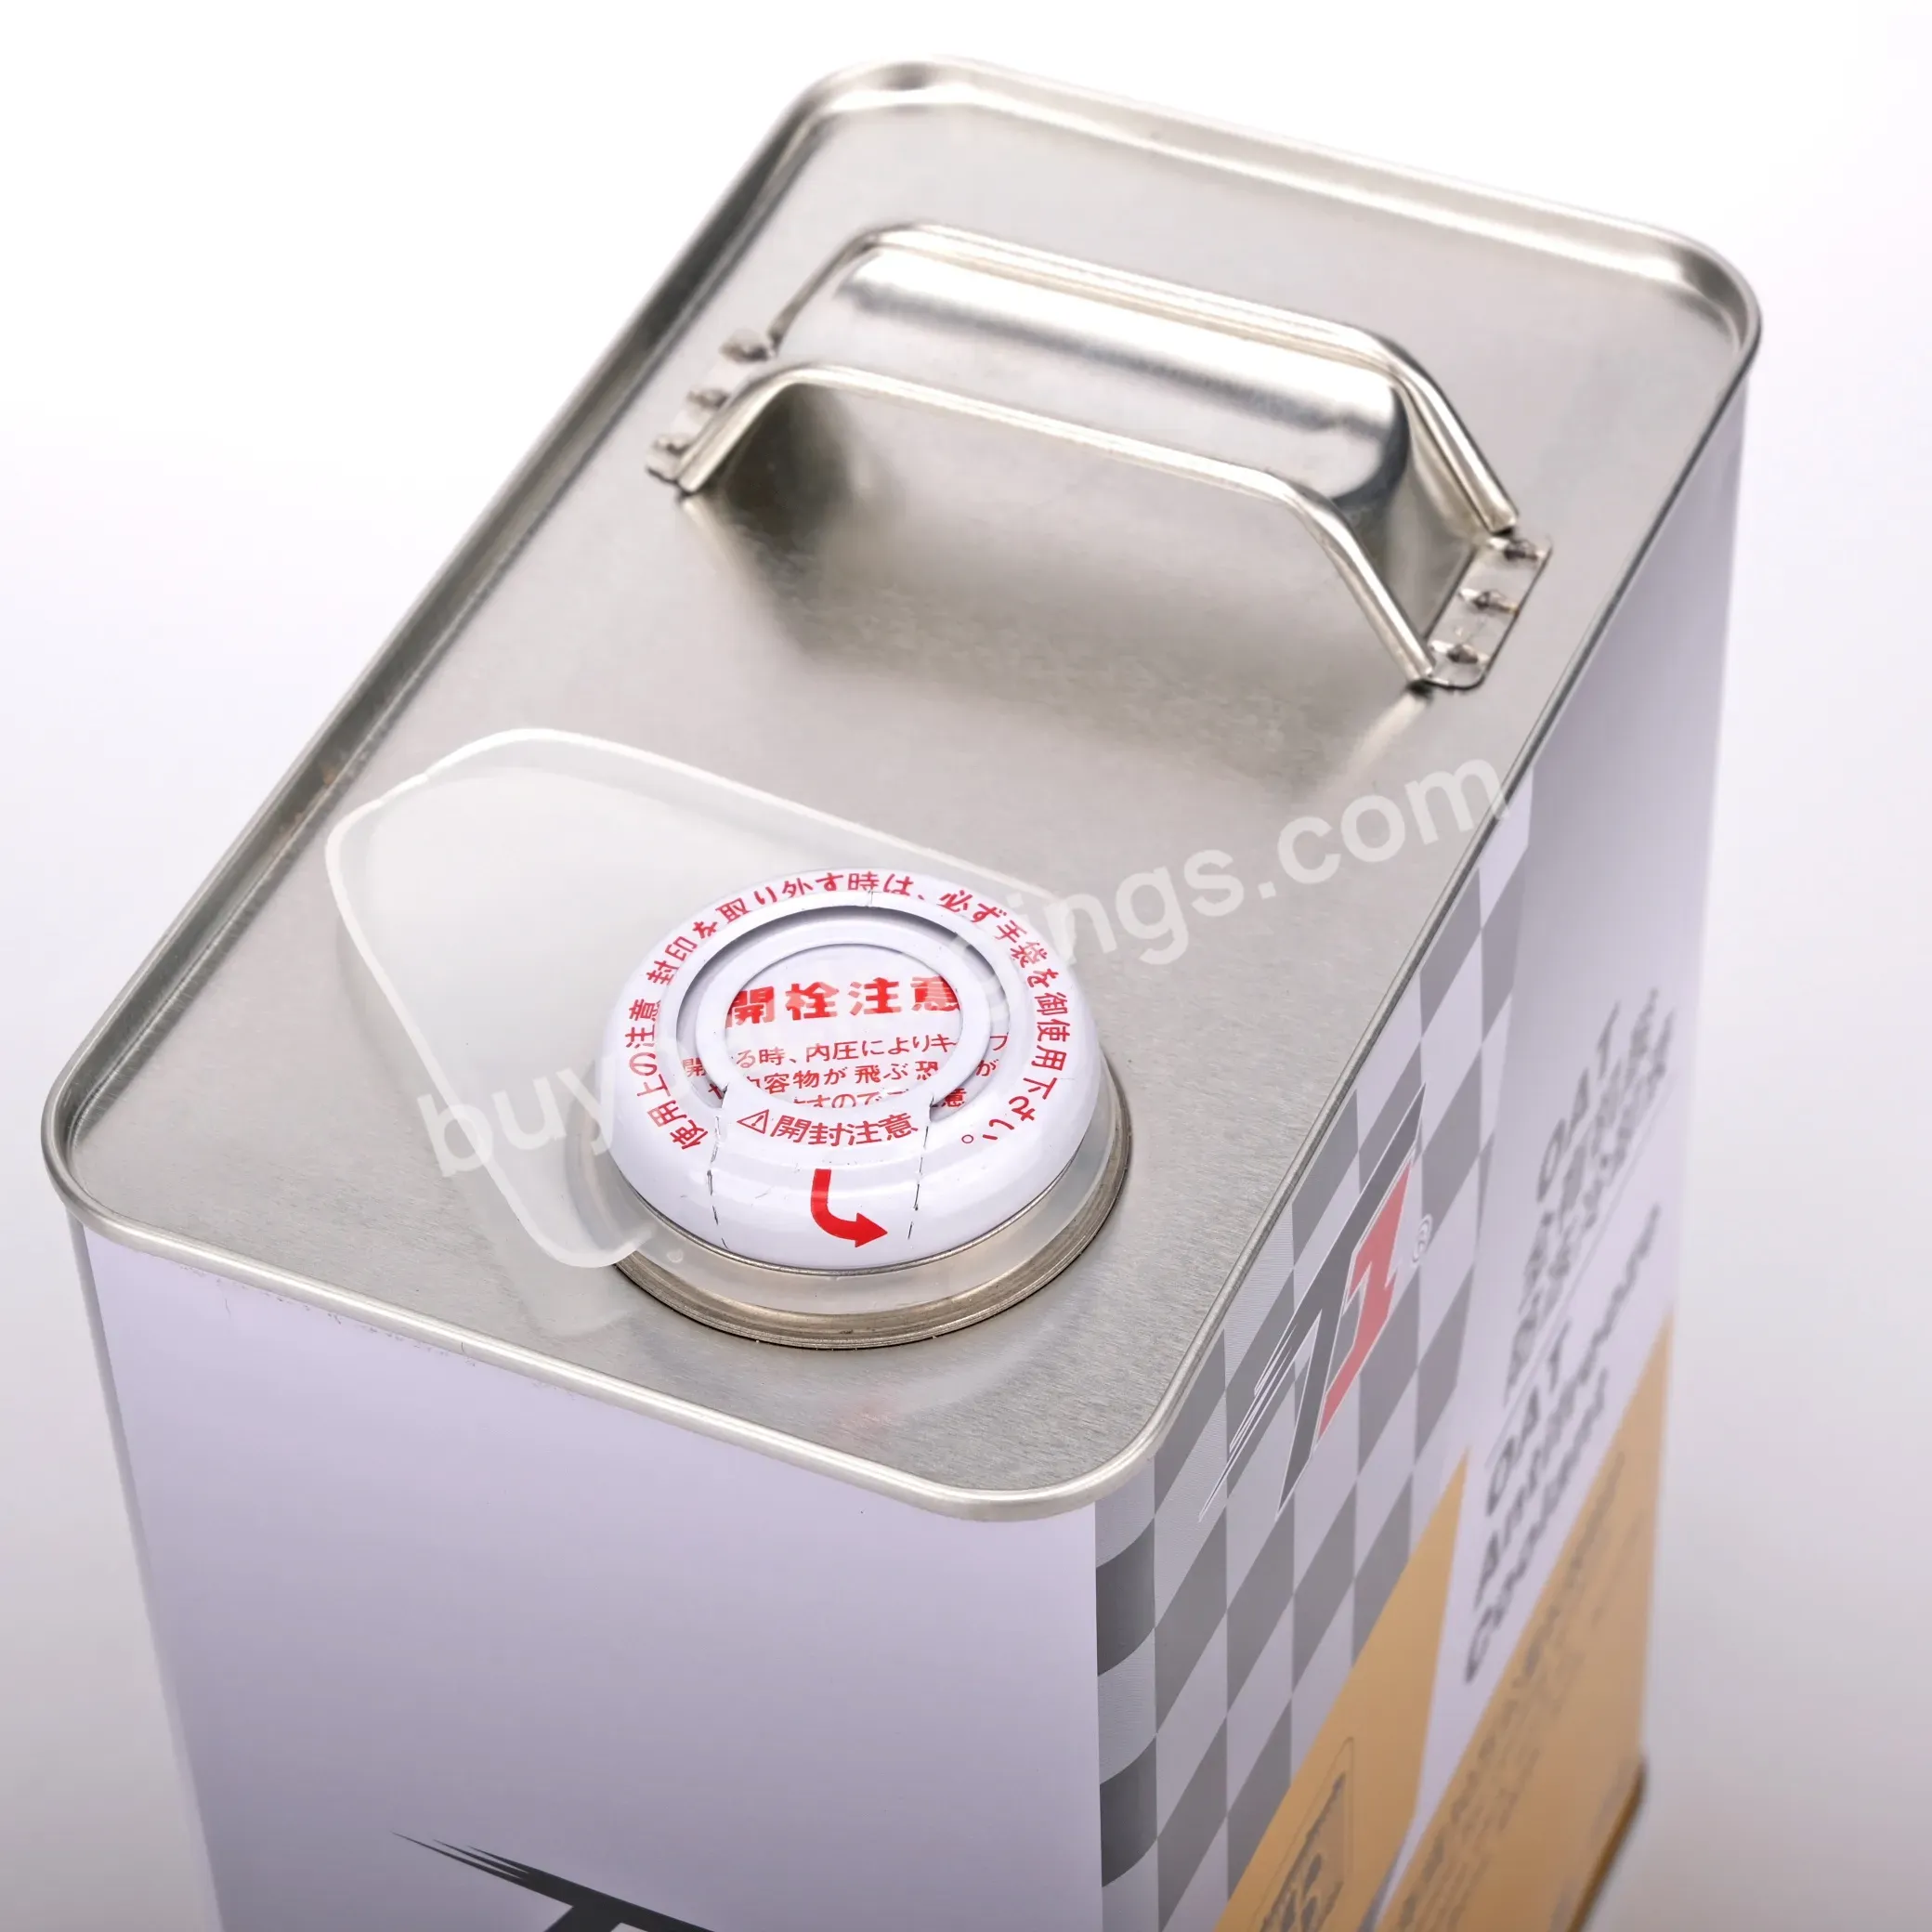 4l Square Metal F-style Tin Can With Metal Screw Top For Paint Engine Oil Antifreeze Coolant - Buy Engine Oil Packaging,4l Square Metal Oil Can,4 Liters F-style Engine Oil Can.